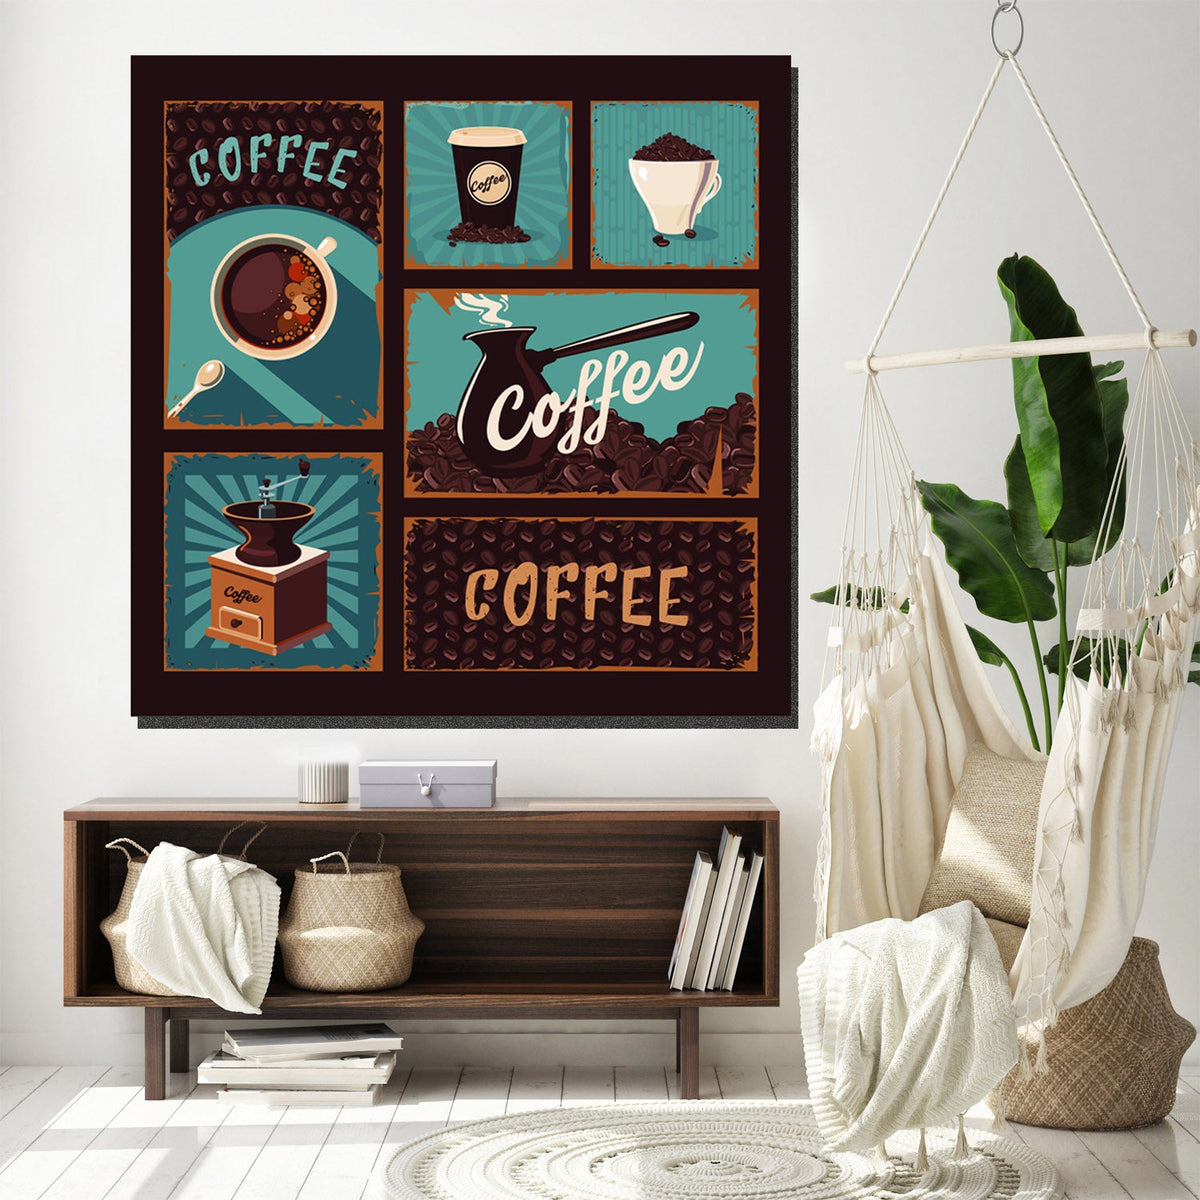 https://cdn.shopify.com/s/files/1/0387/9986/8044/products/CoffeeshopPosterCanvasArtprintStretched-3.jpg